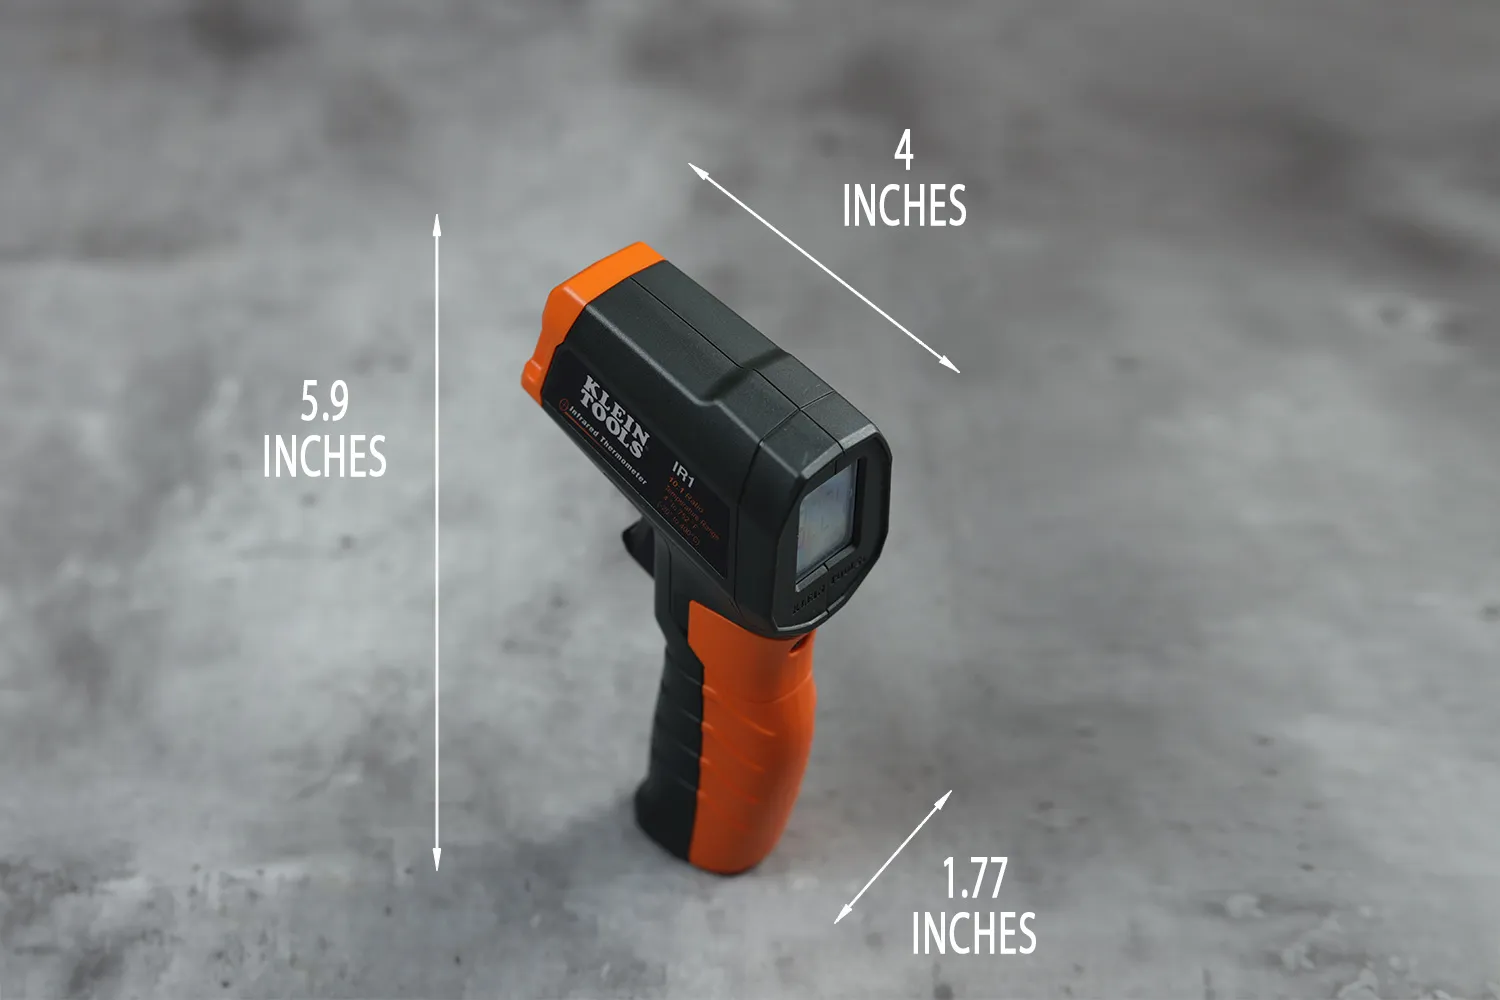 Klein Tools Dual-Laser Infrared Thermometer IR10 Review - Pro Tool Reviews